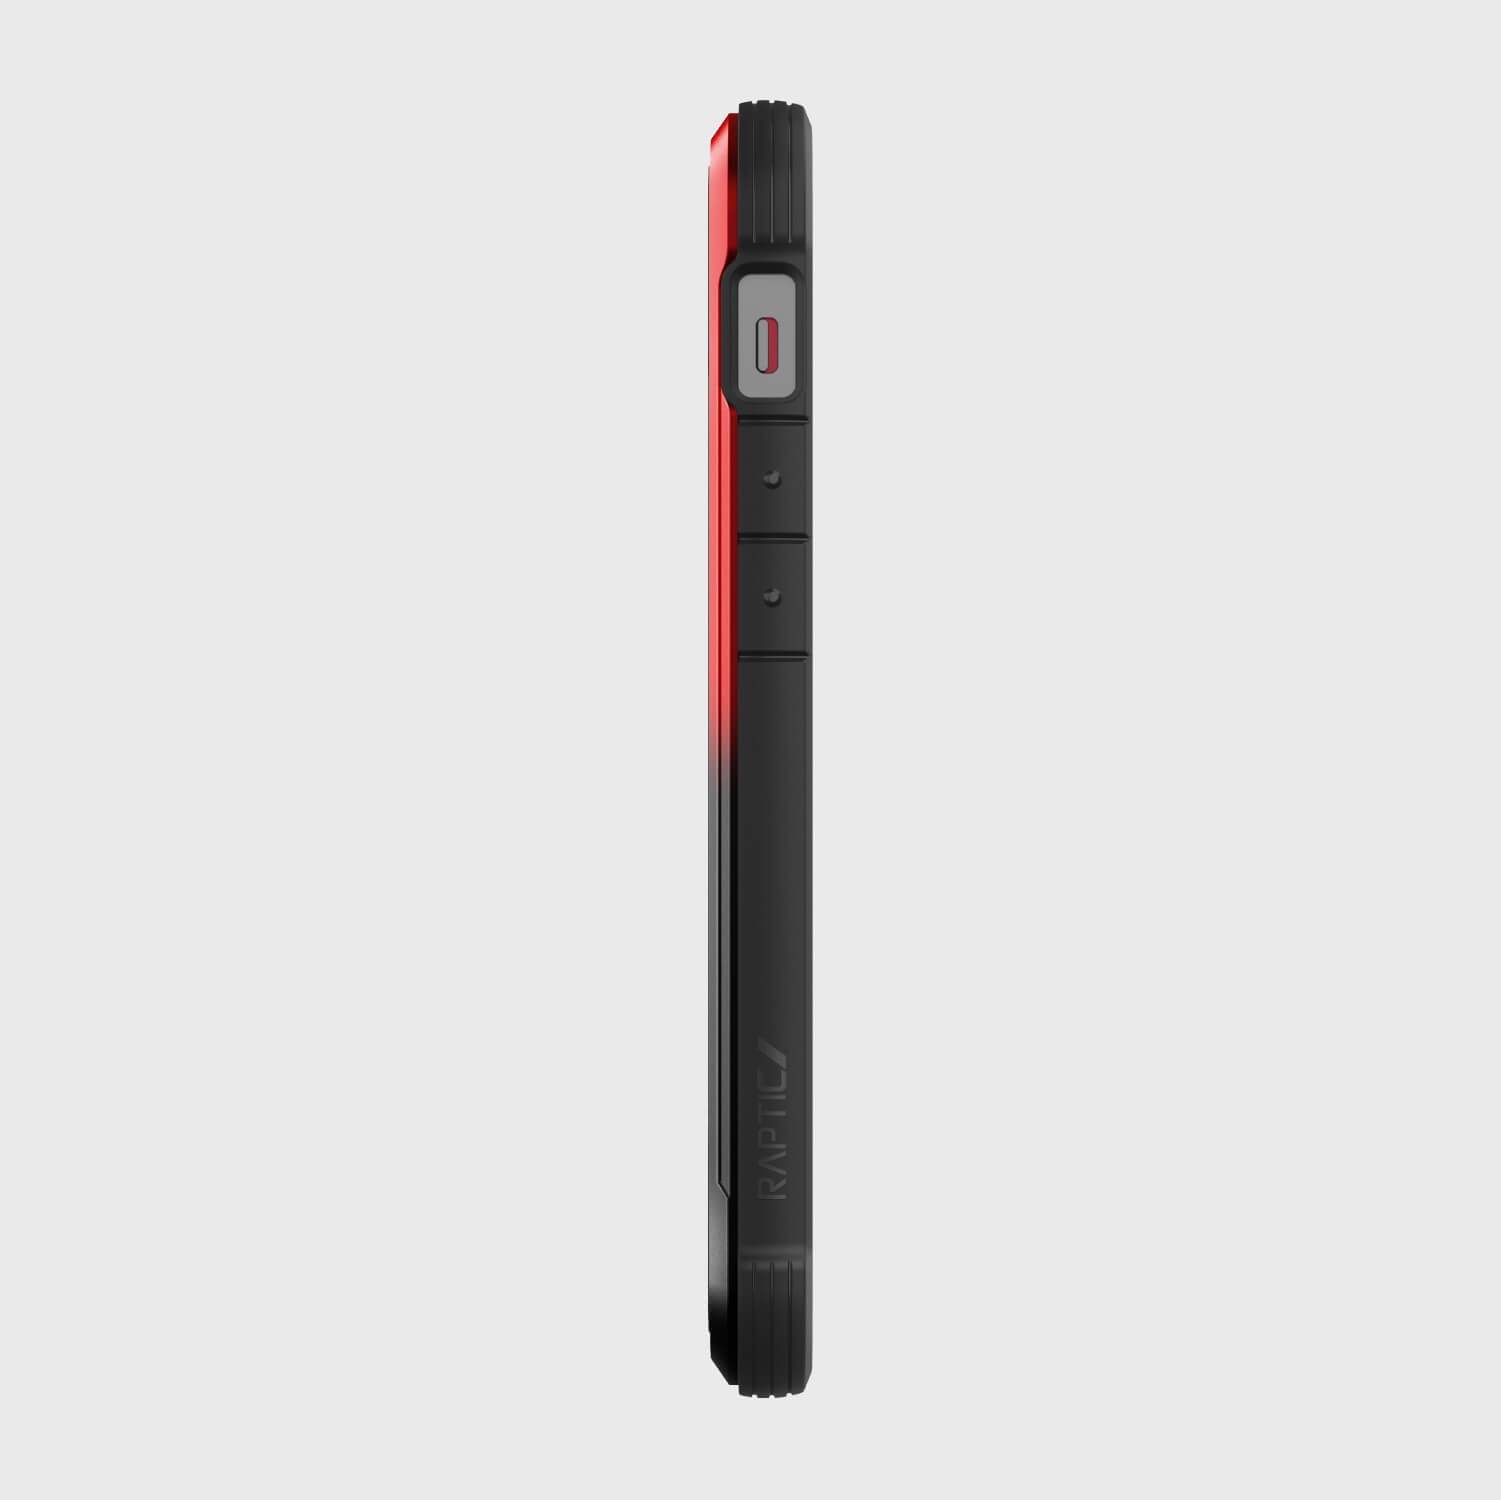 A black and red iPhone 12 Mini Case - SHIELD by Raptic on a white background.